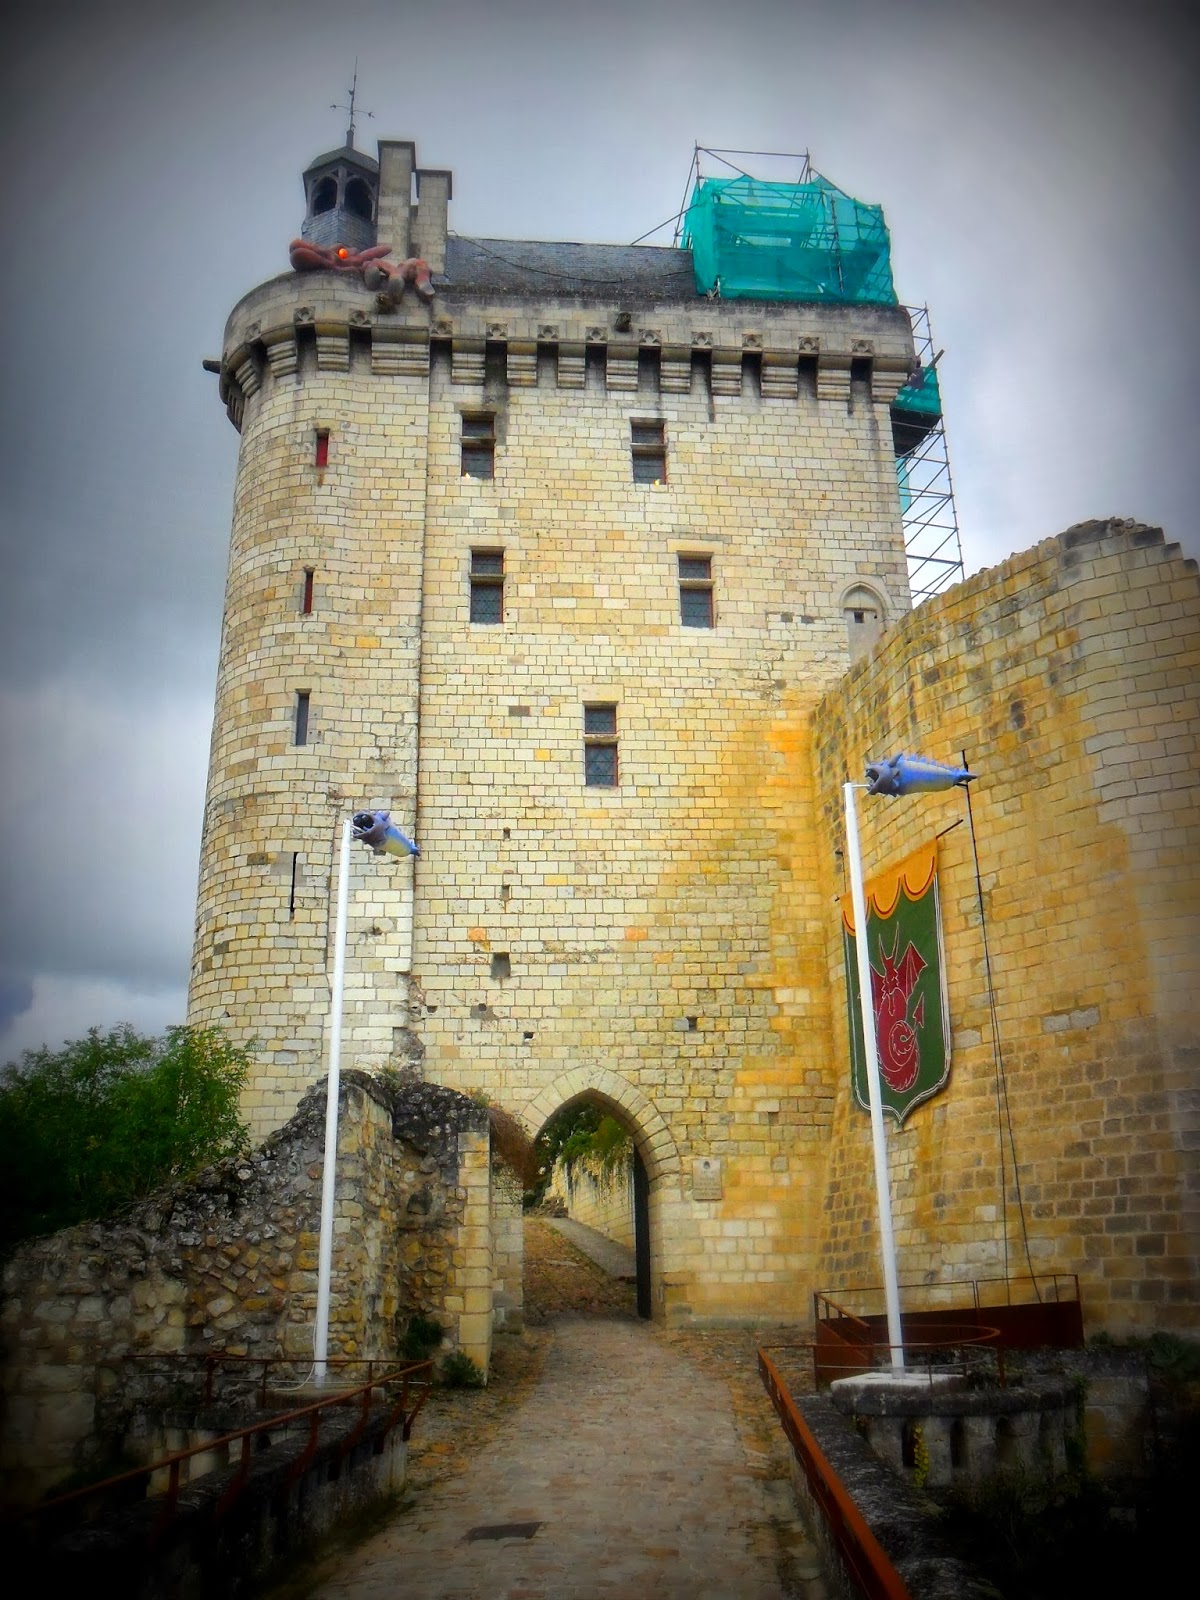 The Castle of Joan of Arc: Chinon Castle - Exploring the Castles of the ...